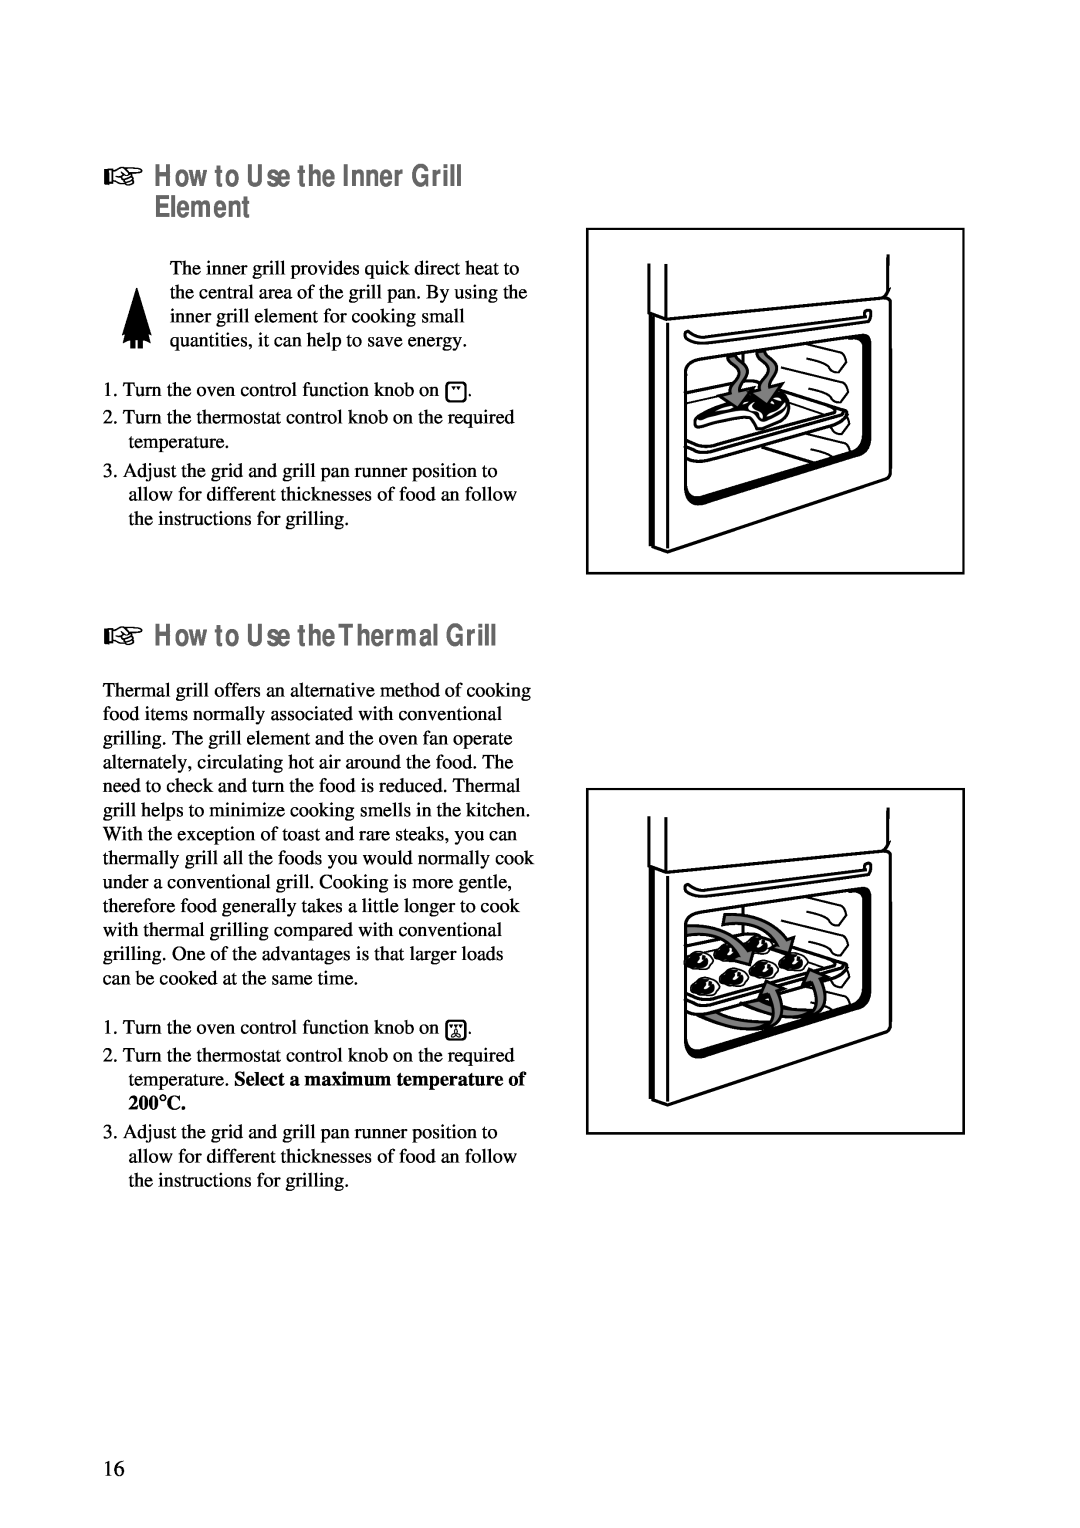 Zanussi ZBC 748 installation manual How to Use the Inner Grill Element, How to Use theThermal Grill 